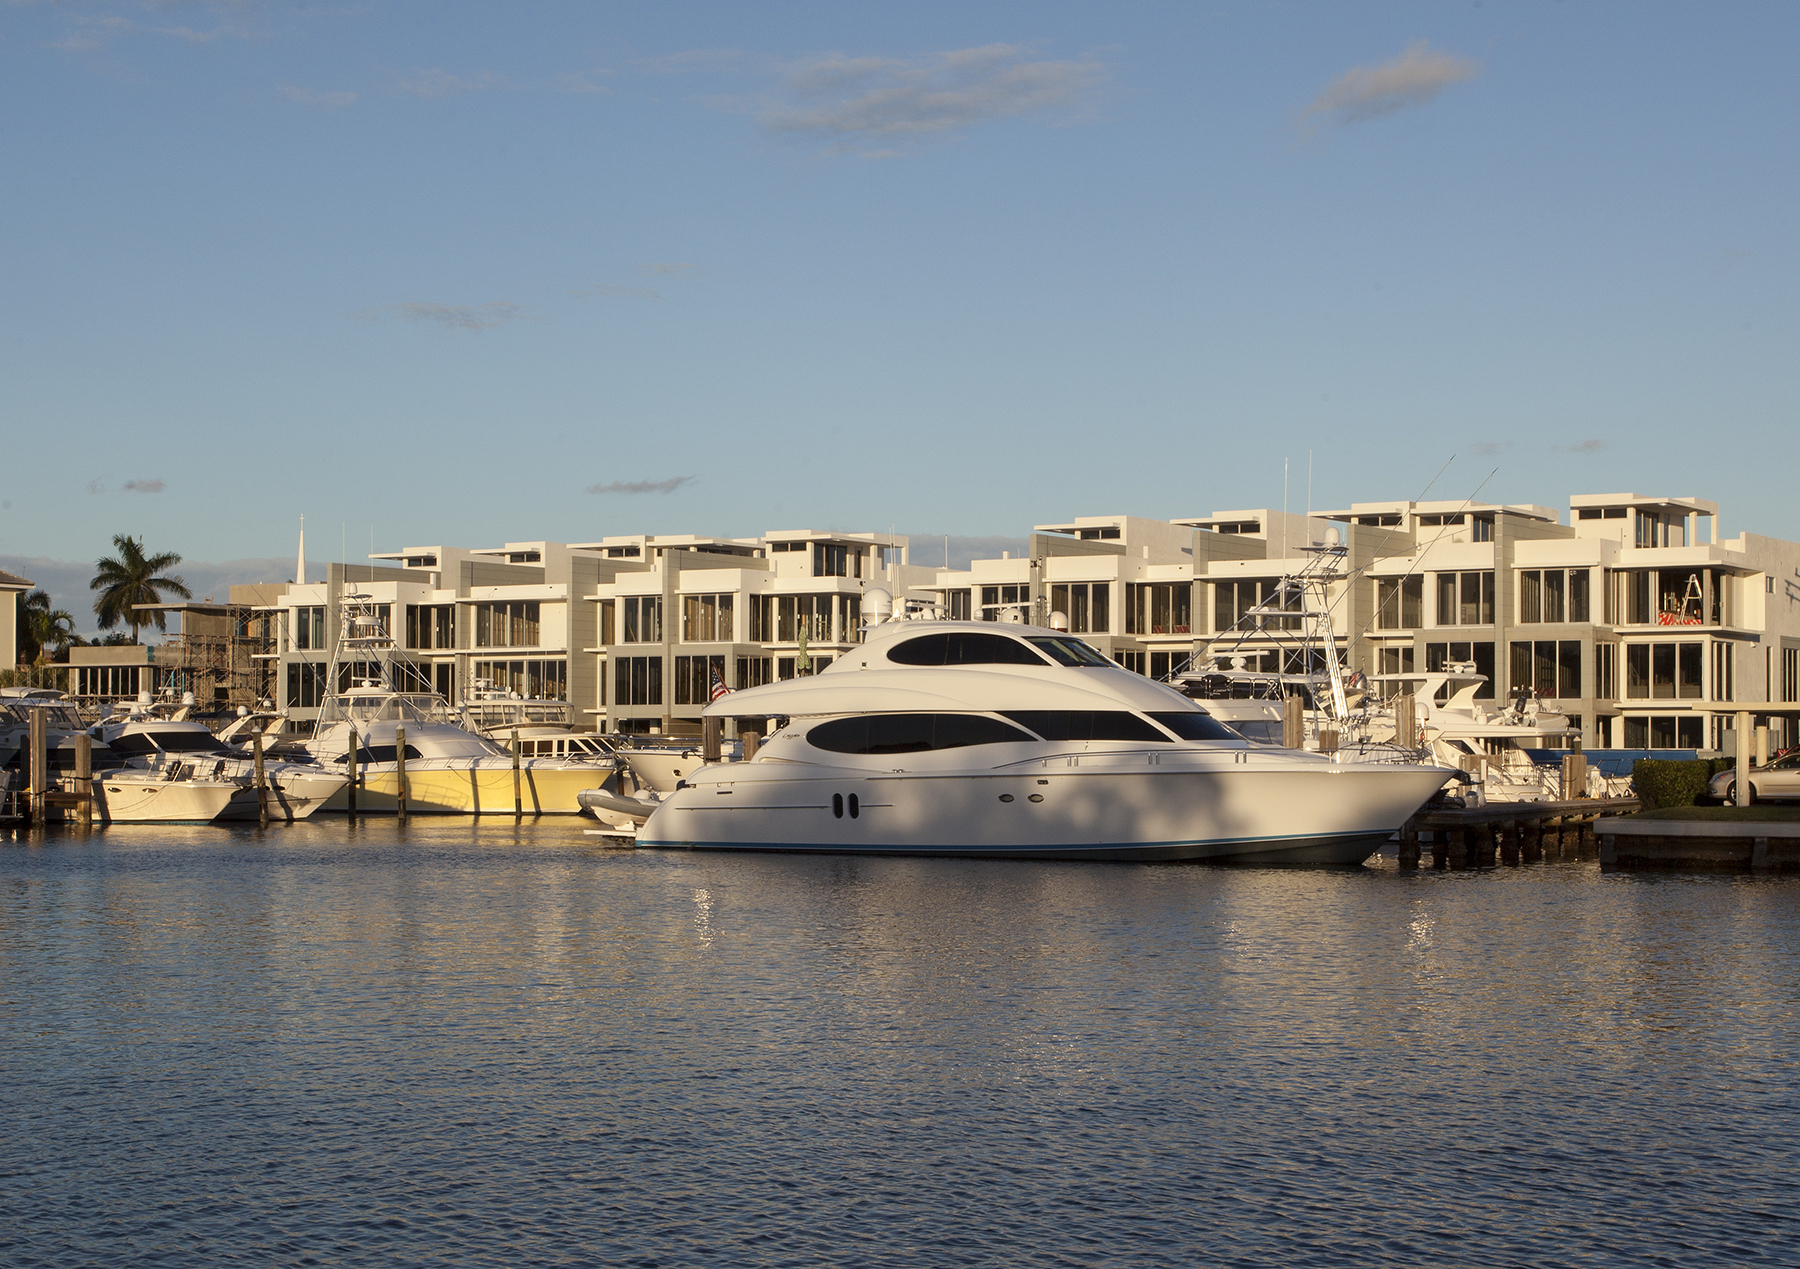 Waterfront Luxury Townhomes with Yacht Dockage Marina Living by Luxury Real Estate Broker Associates Pascal Liguori & Son